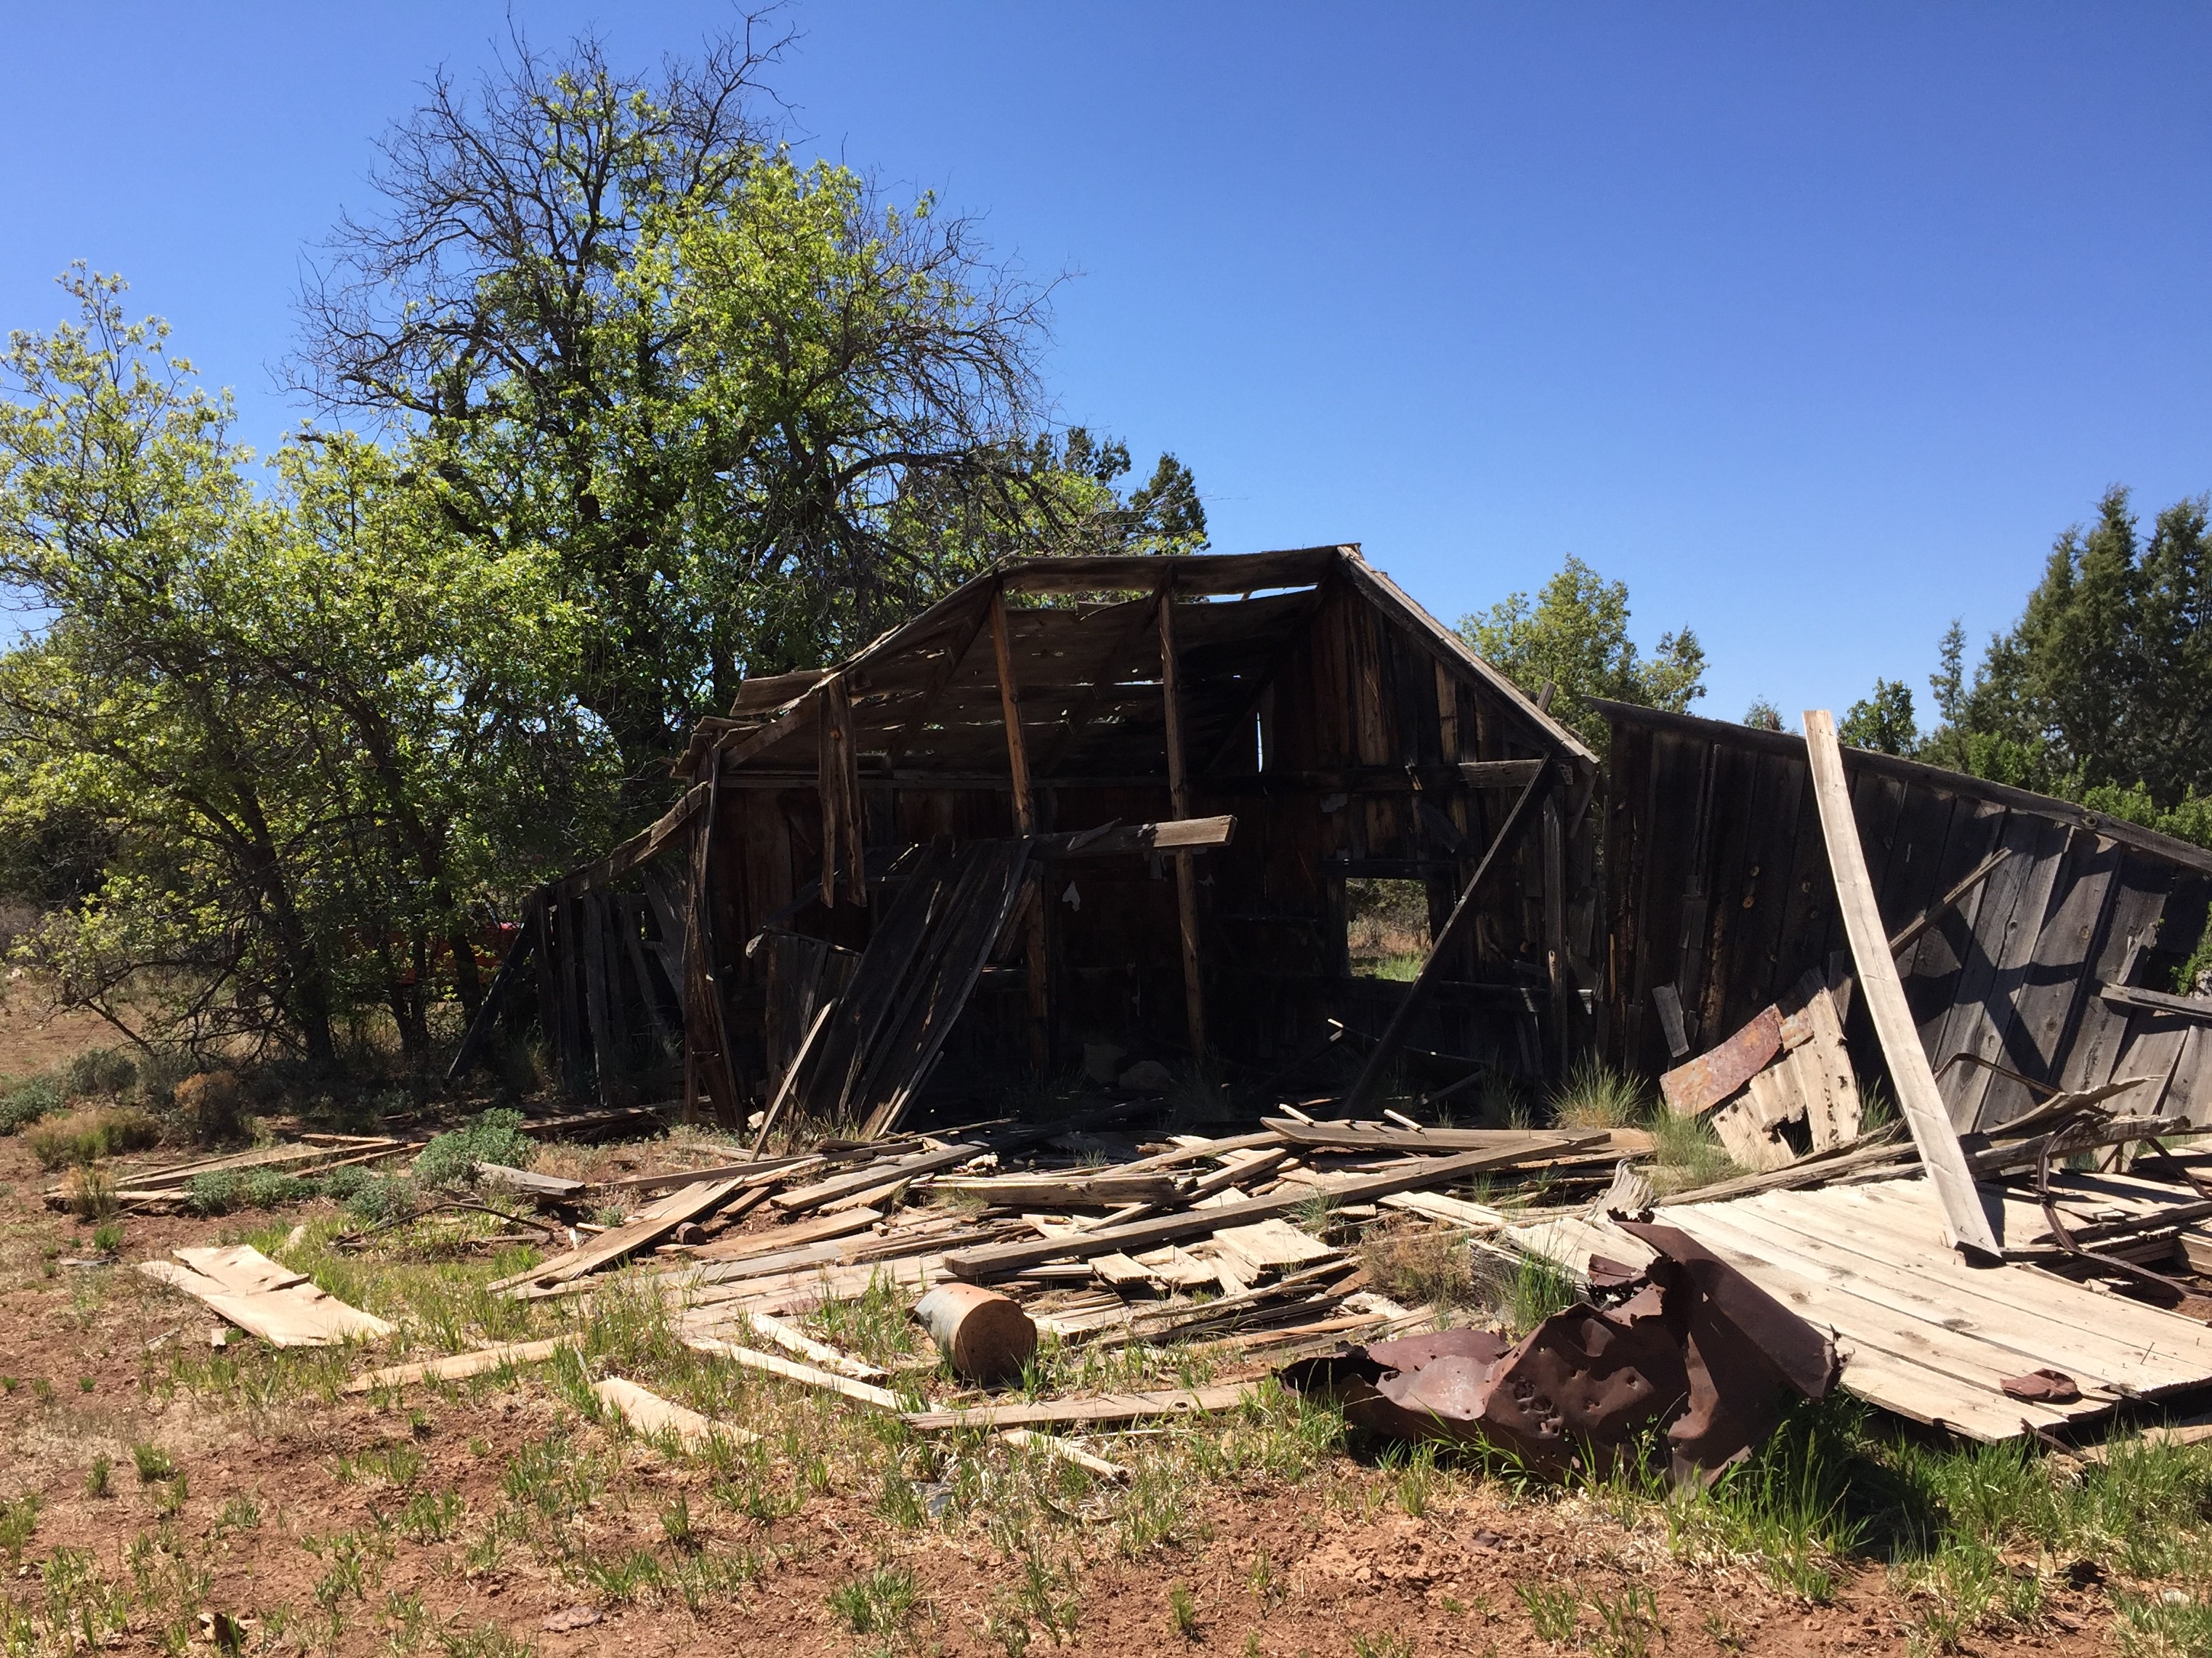 Ruins of the old building at Oak Grove on the Arizona Strip